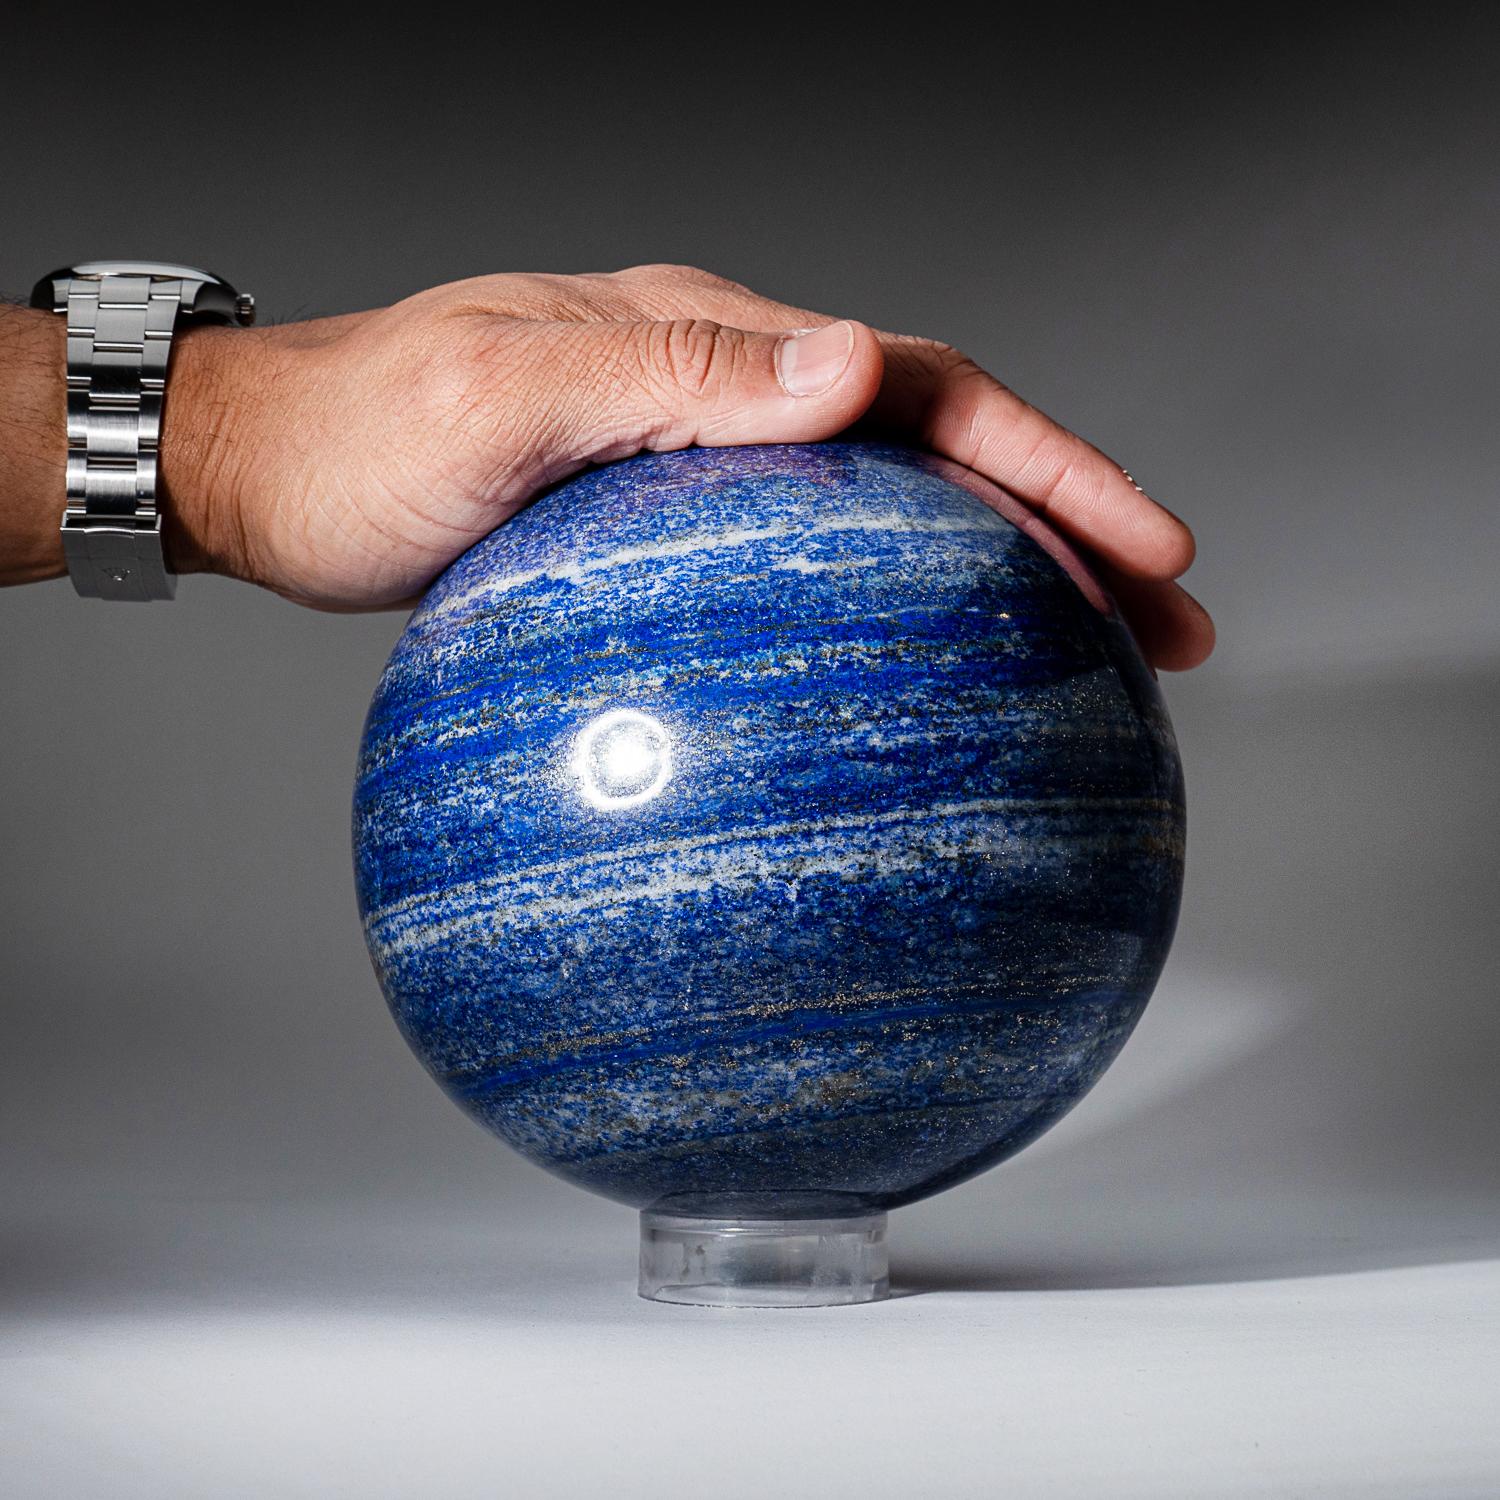 This top-quality, Lapis Lazuli sphere from Afghanistan, has been beautifully hand-polished for maximum aesthetic appeal. The solid piece of natural stone boasts a vibrant, ultra-royal blue hue, complemented by glimmering pyrite microcrystals. Lapis